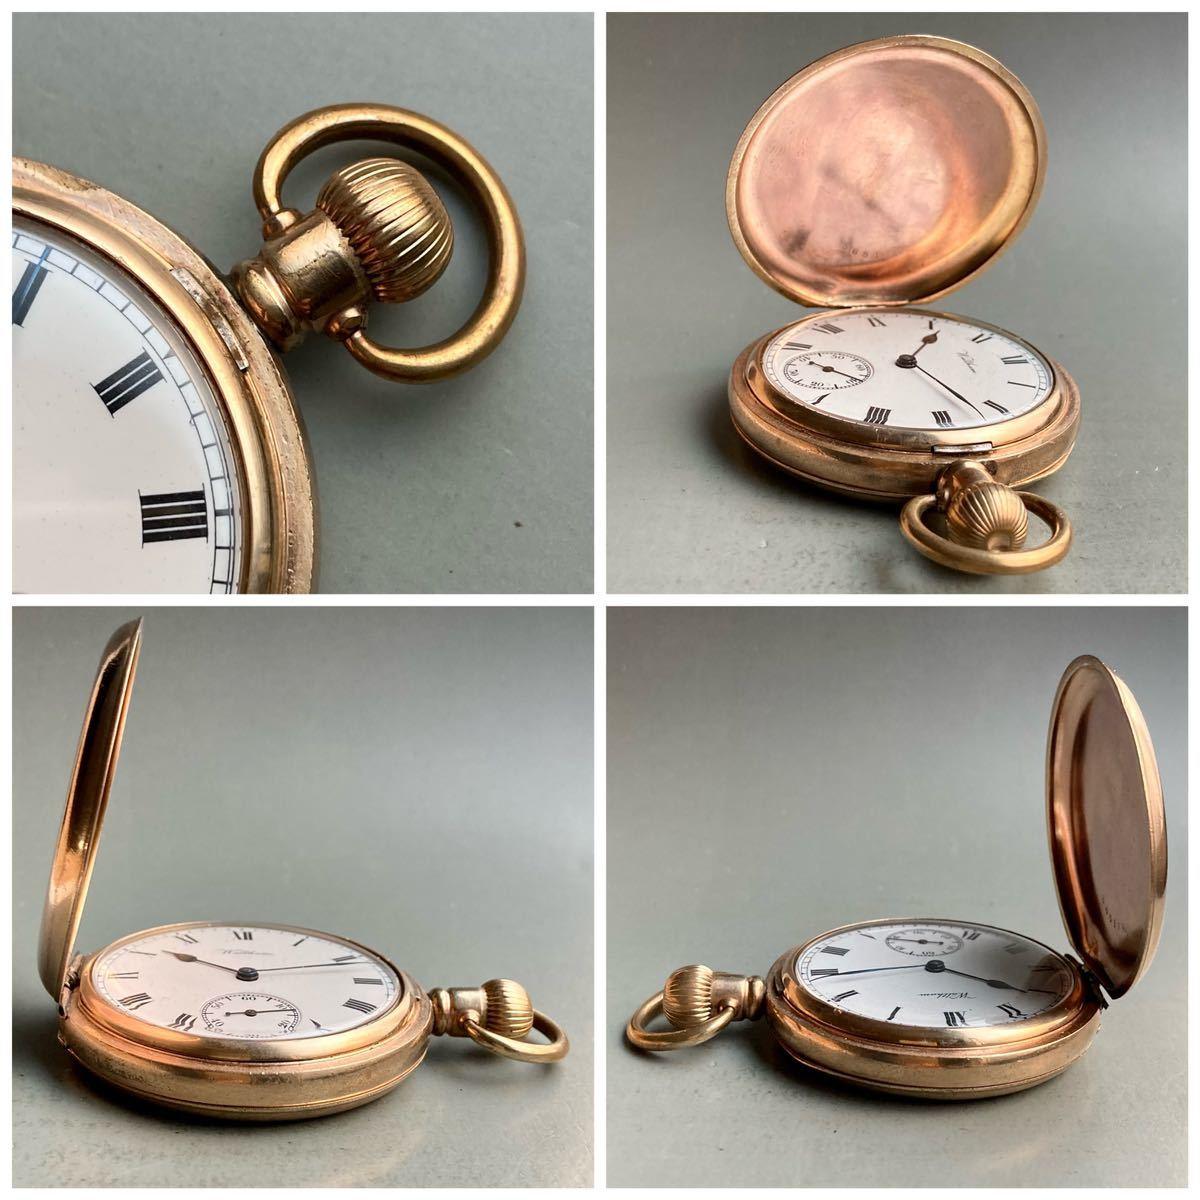 Waltham Pocket Watch Antique Manual Hunter Case Gold 49mm 16s Vintage Watch - Murphy Johnson Watches Co.